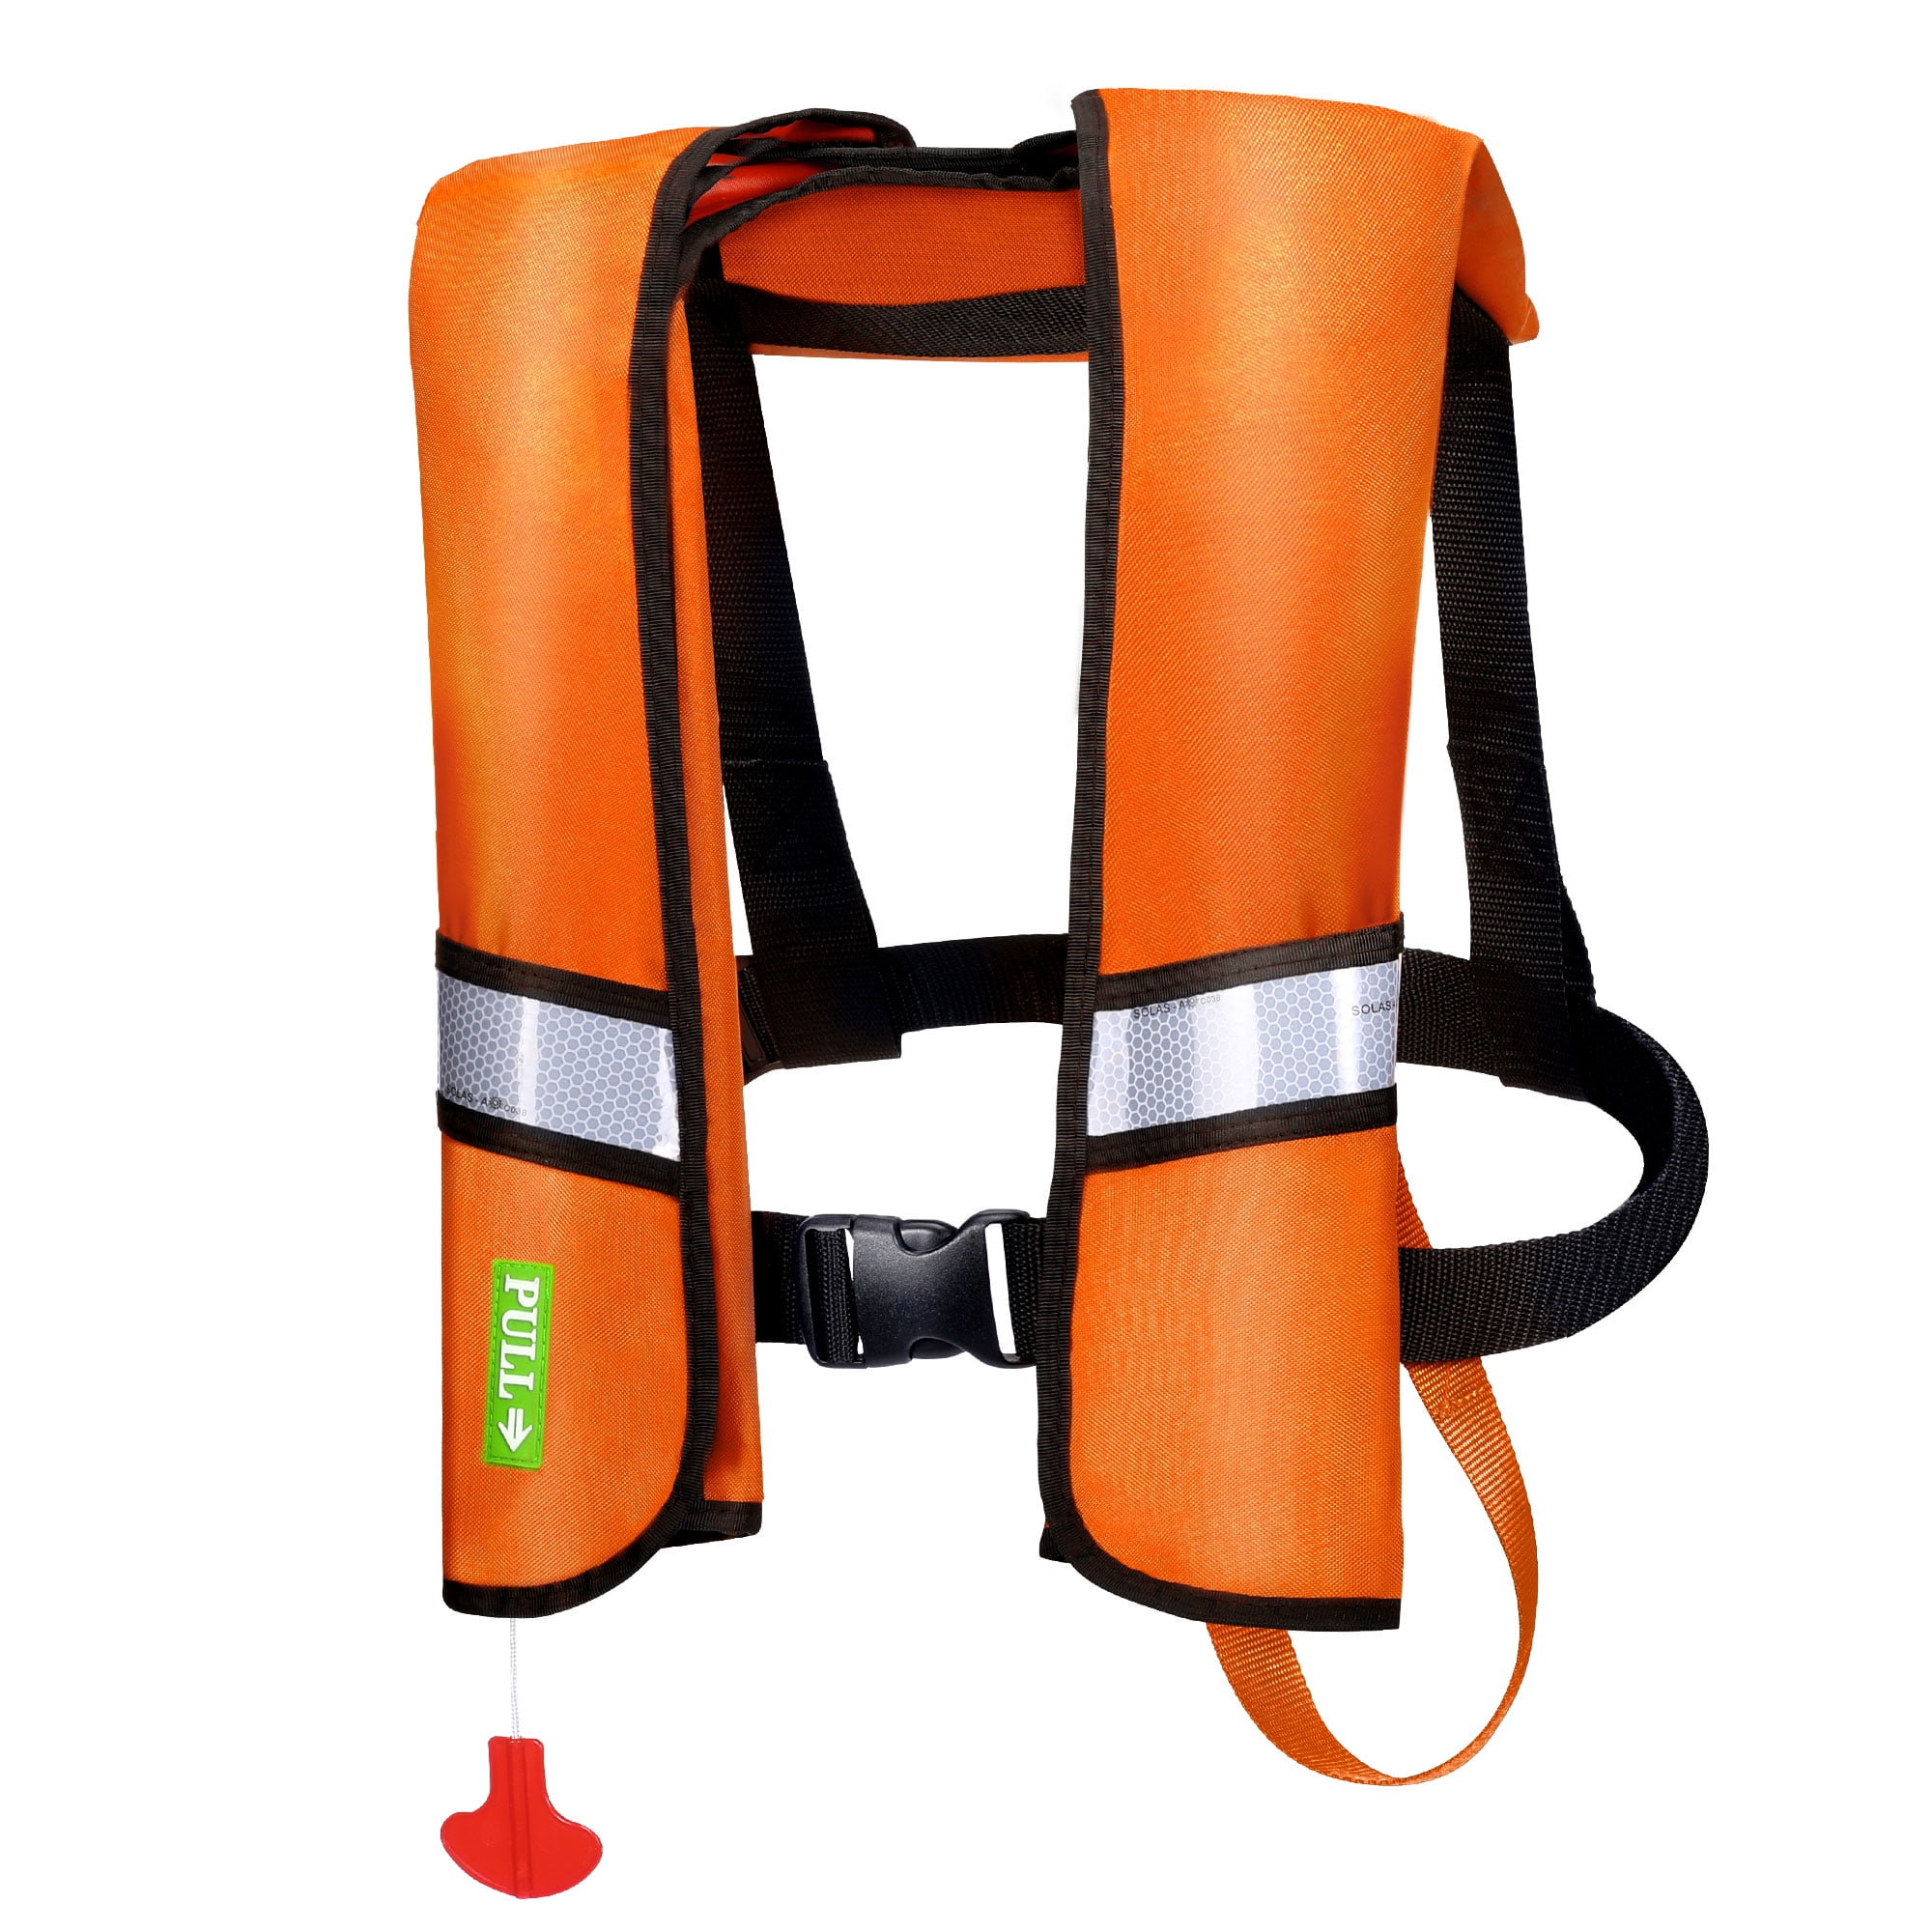 WARMOUNTS Automatic Inflatable Life Jacket with Reflectors & Whistle, Adult  PFD Survival Buoyancy Vest for Boating, Fishing, Sailing, Surfing, Kayaking  & Swimming ( Max Waist Size: 50'' ) 